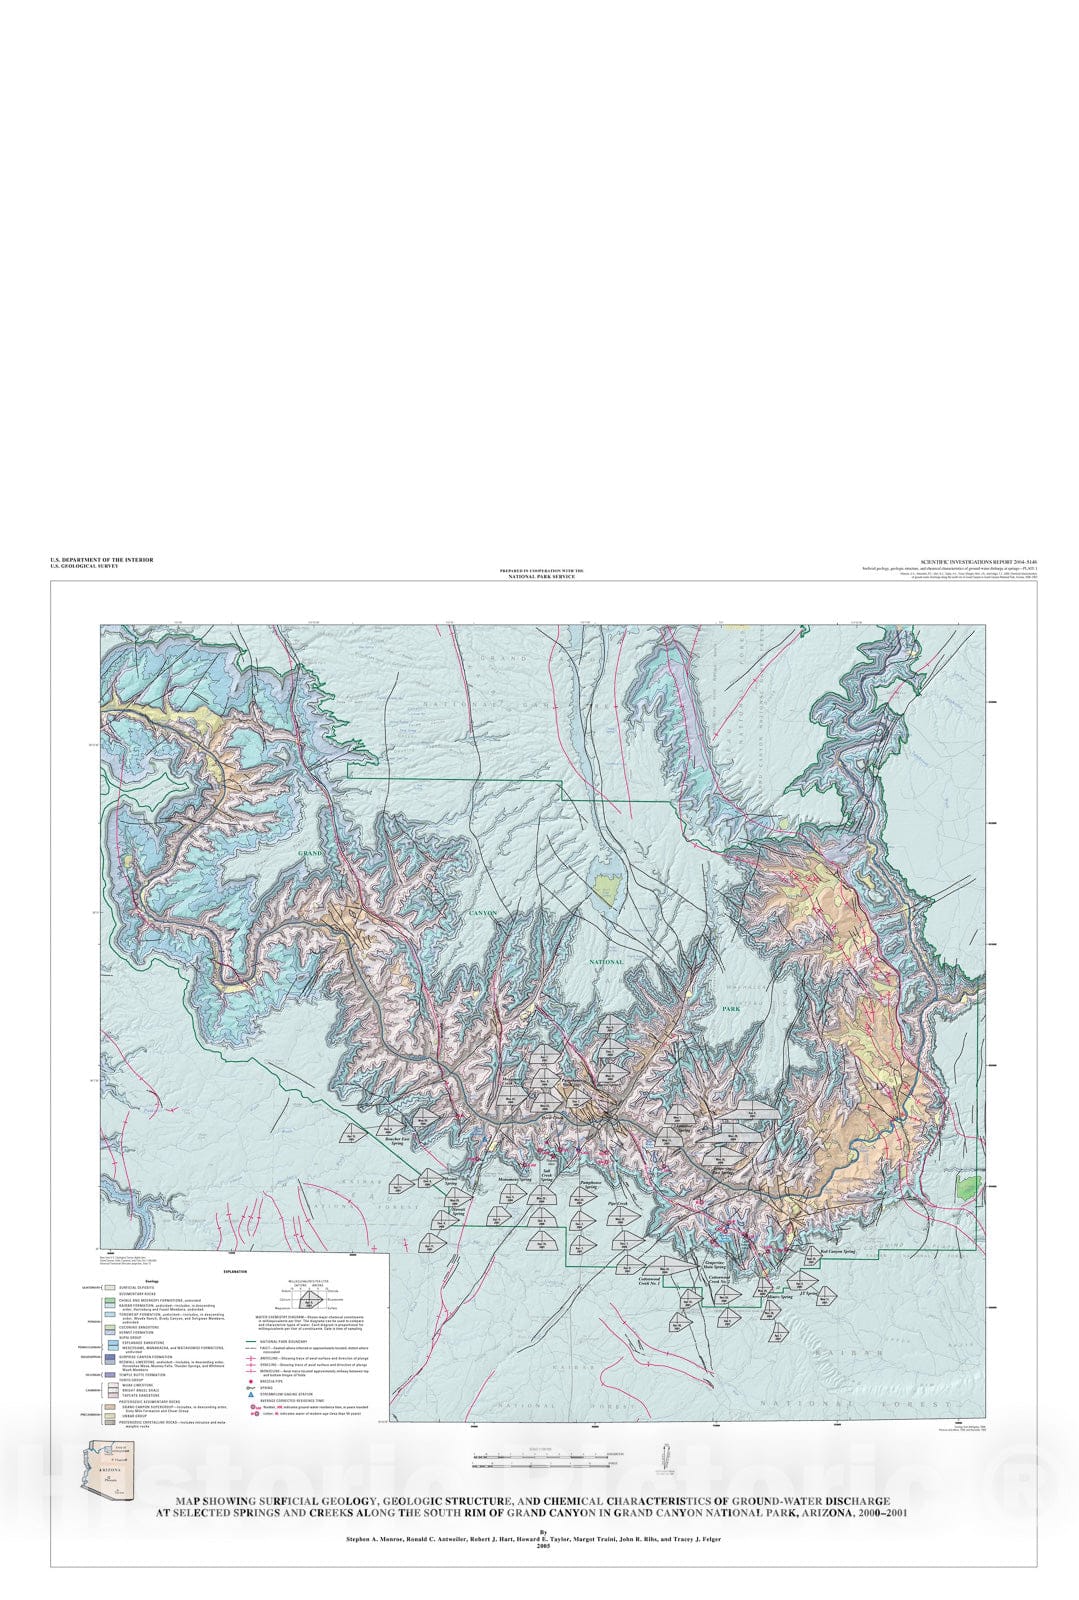 Map : Chemical characteristics of ground-water discharge along the south rim of Grand Canyon in Grand Canyon National Park, Arizona, 2000-2001, 2005 Cartography Wall Art :